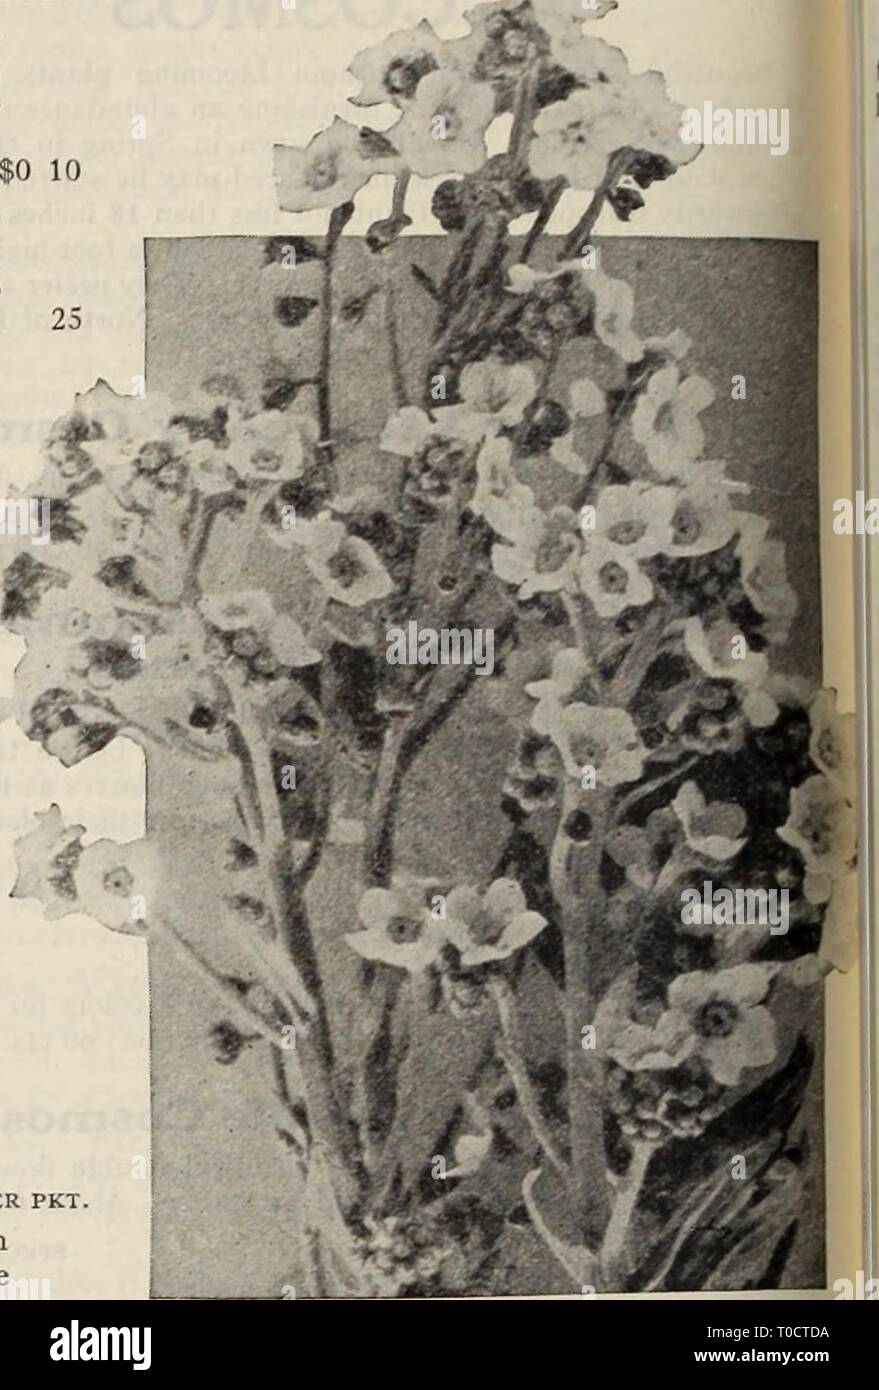 Dreer's garden book  Henry Dreer's garden book / Henry A. Dreer. dreersgardenbook1931dree Year:   ^RELIABLE FLOWER SEEDSj PH1MDELPHIR CynOgloSSUm (Chinese Forget-me-not) per pkt. 2148 Amabile Blue. An annual recently introduced from China; of the easiest culture, forming strong plants 18 to 24 inches high and producing through the summer months sprays of intense blue Forget-me-not-like flowers, delicately sweet scented. A splendid addition to the compara- tively short list of real blue flowers.  oz., 40 cts 2149 Amabile Pink (New). In growth and general appearance this re- sembles the Cynog Stock Photo